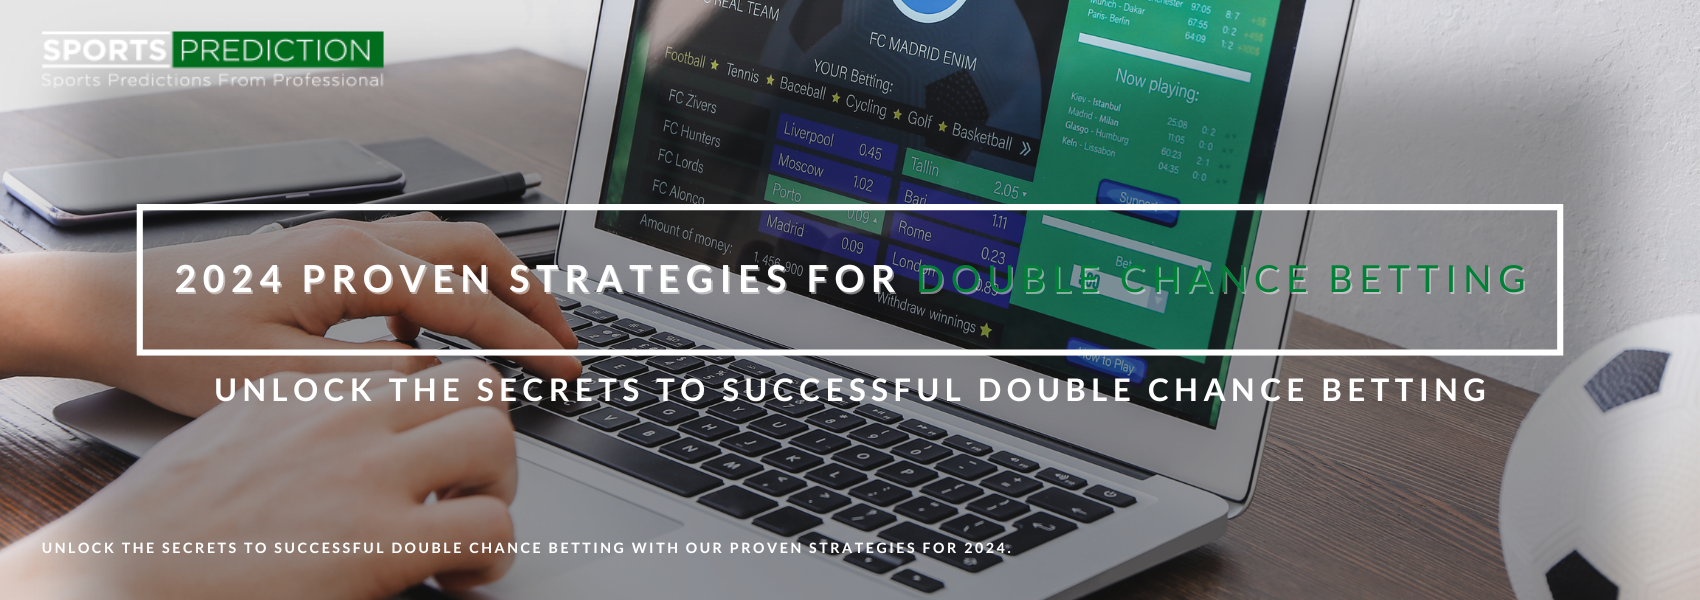 2024 Proven Strategies For Double Chance Betting